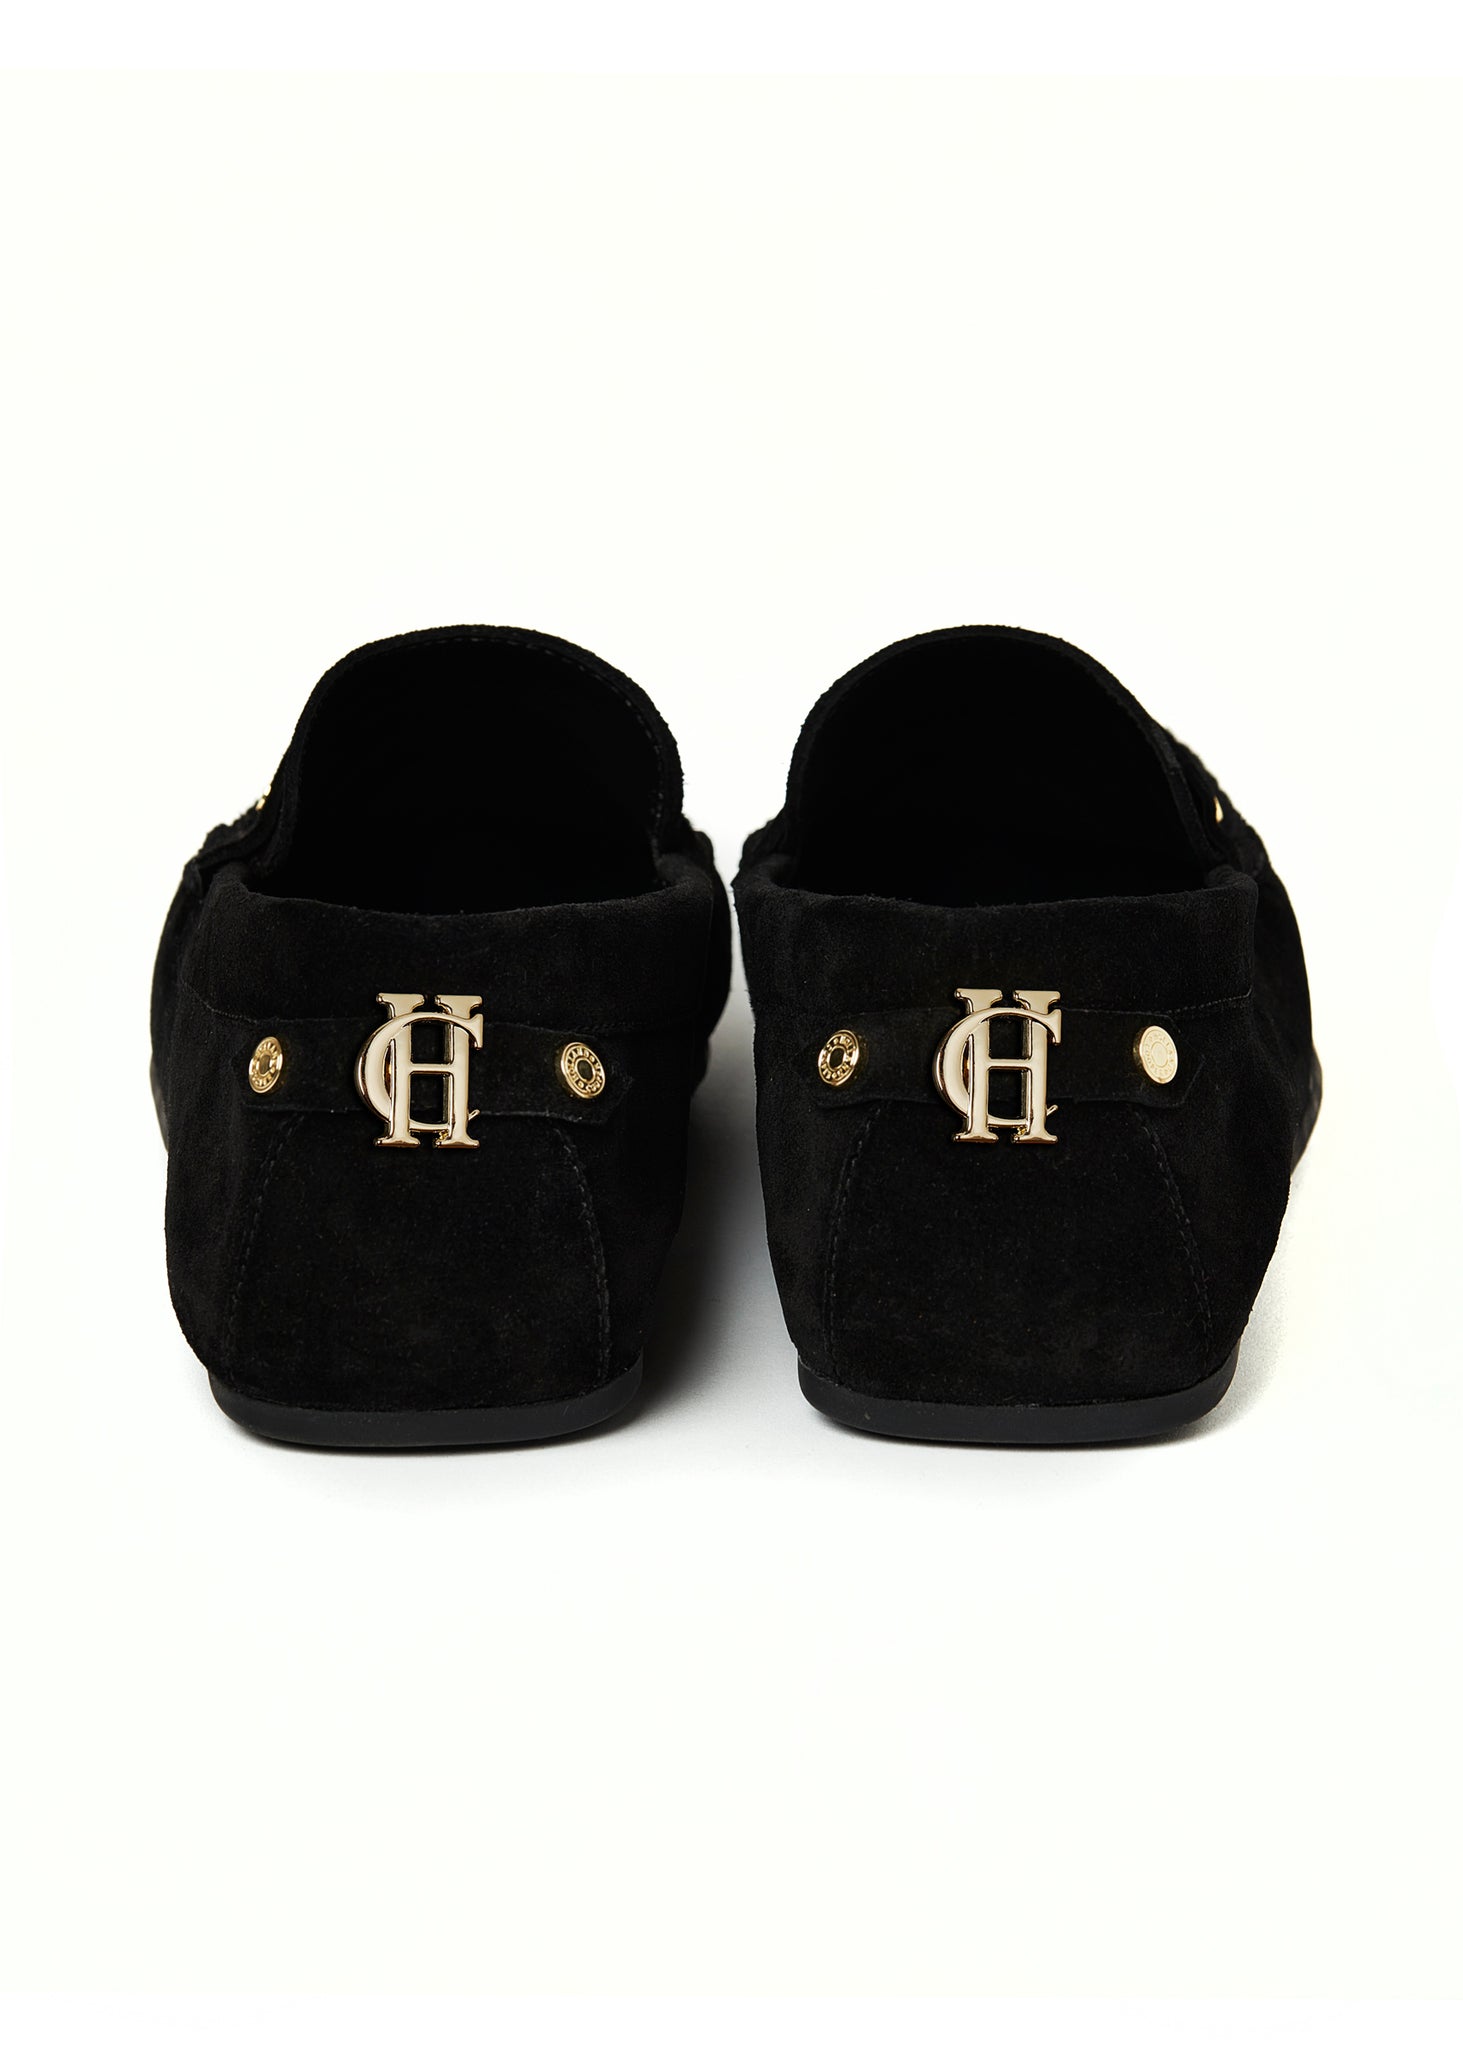 back shot of classic black suede loafers with a leather sole and gold hardware